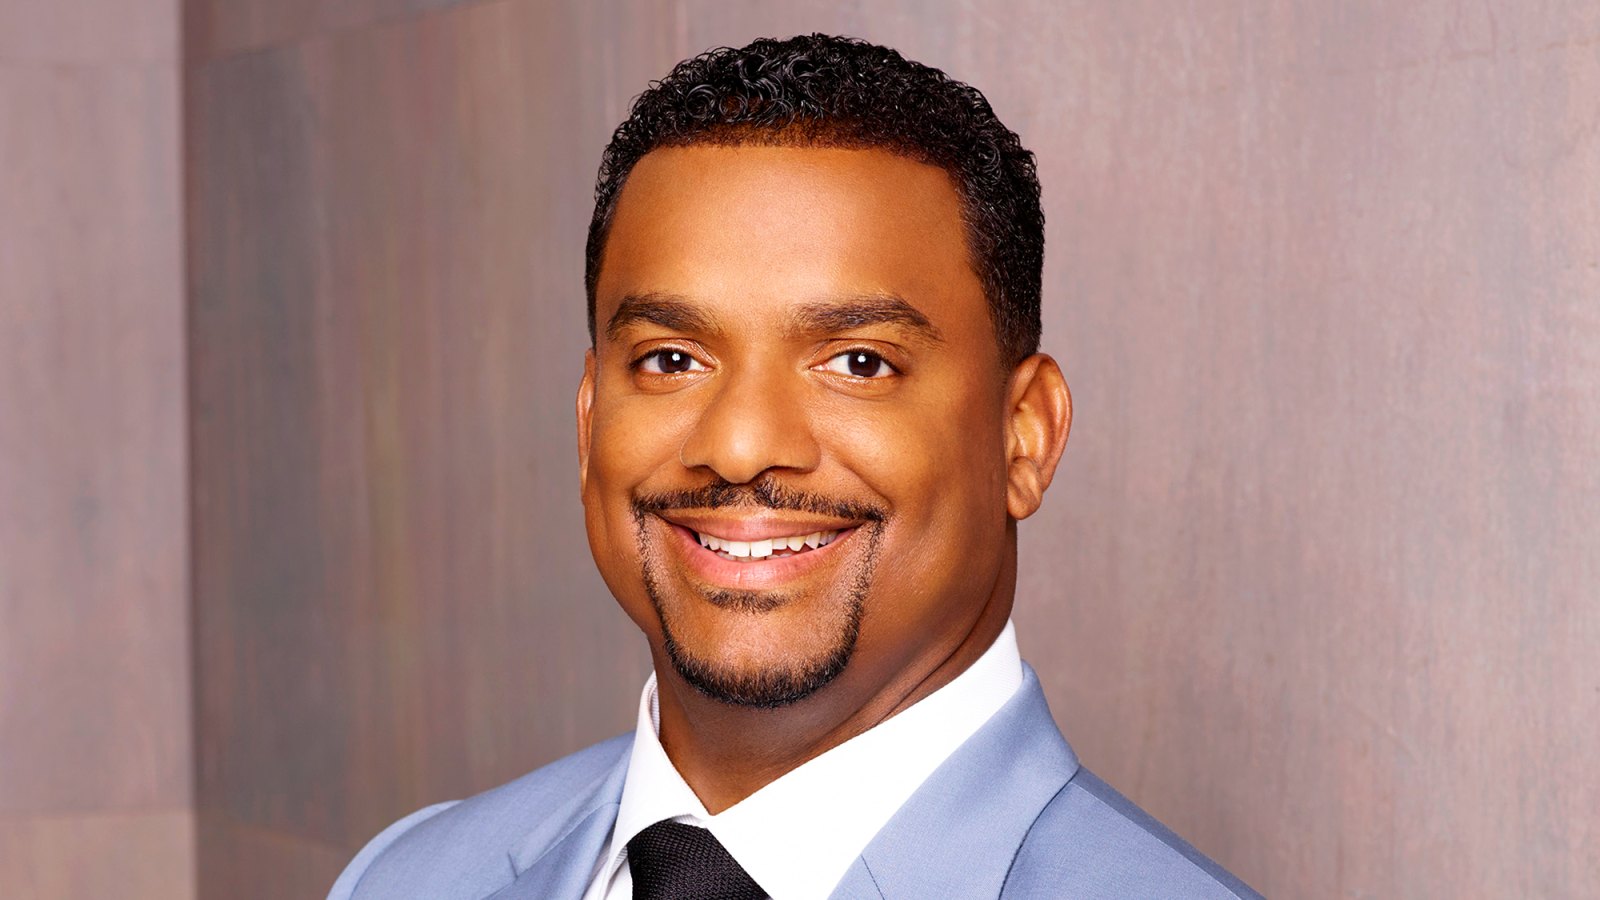 Alfonso Ribeiro is the host of ABC’s ‘America’s Funniest Home Videos‘